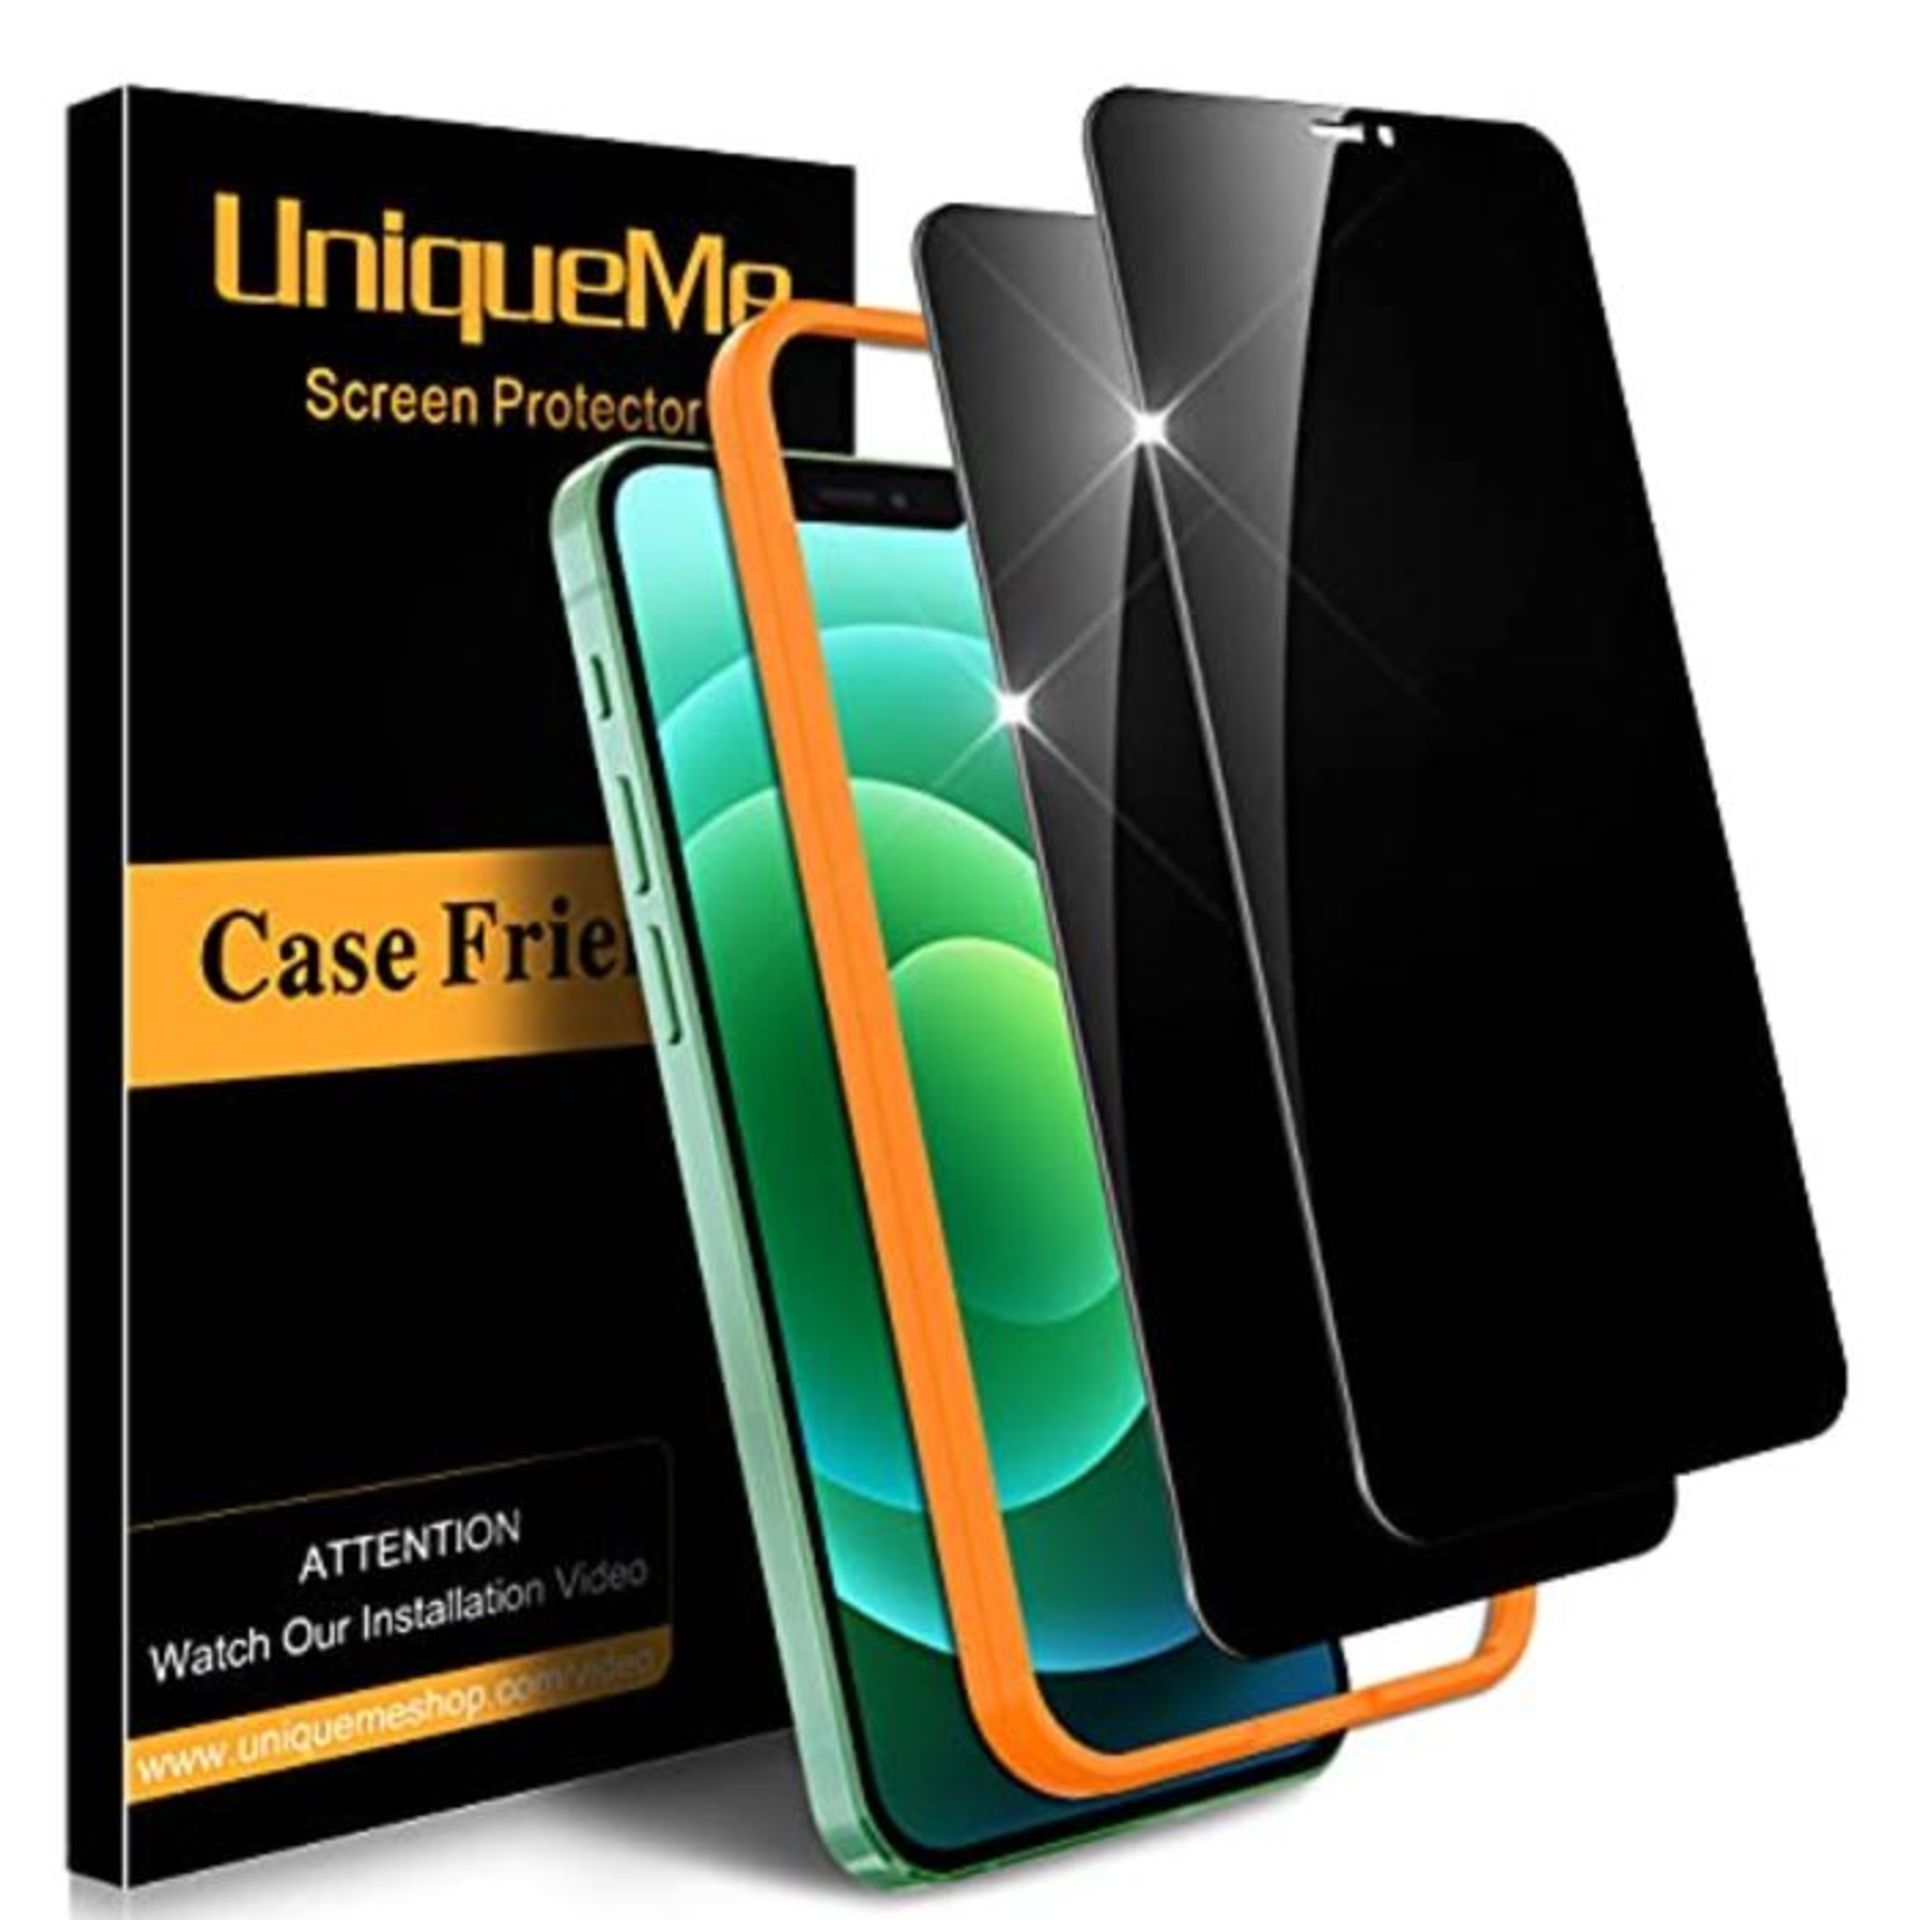 [2 PACK] UniqueMe Tempered Glass Privacy Screen Protector Compatible with iPhone 12 Pr